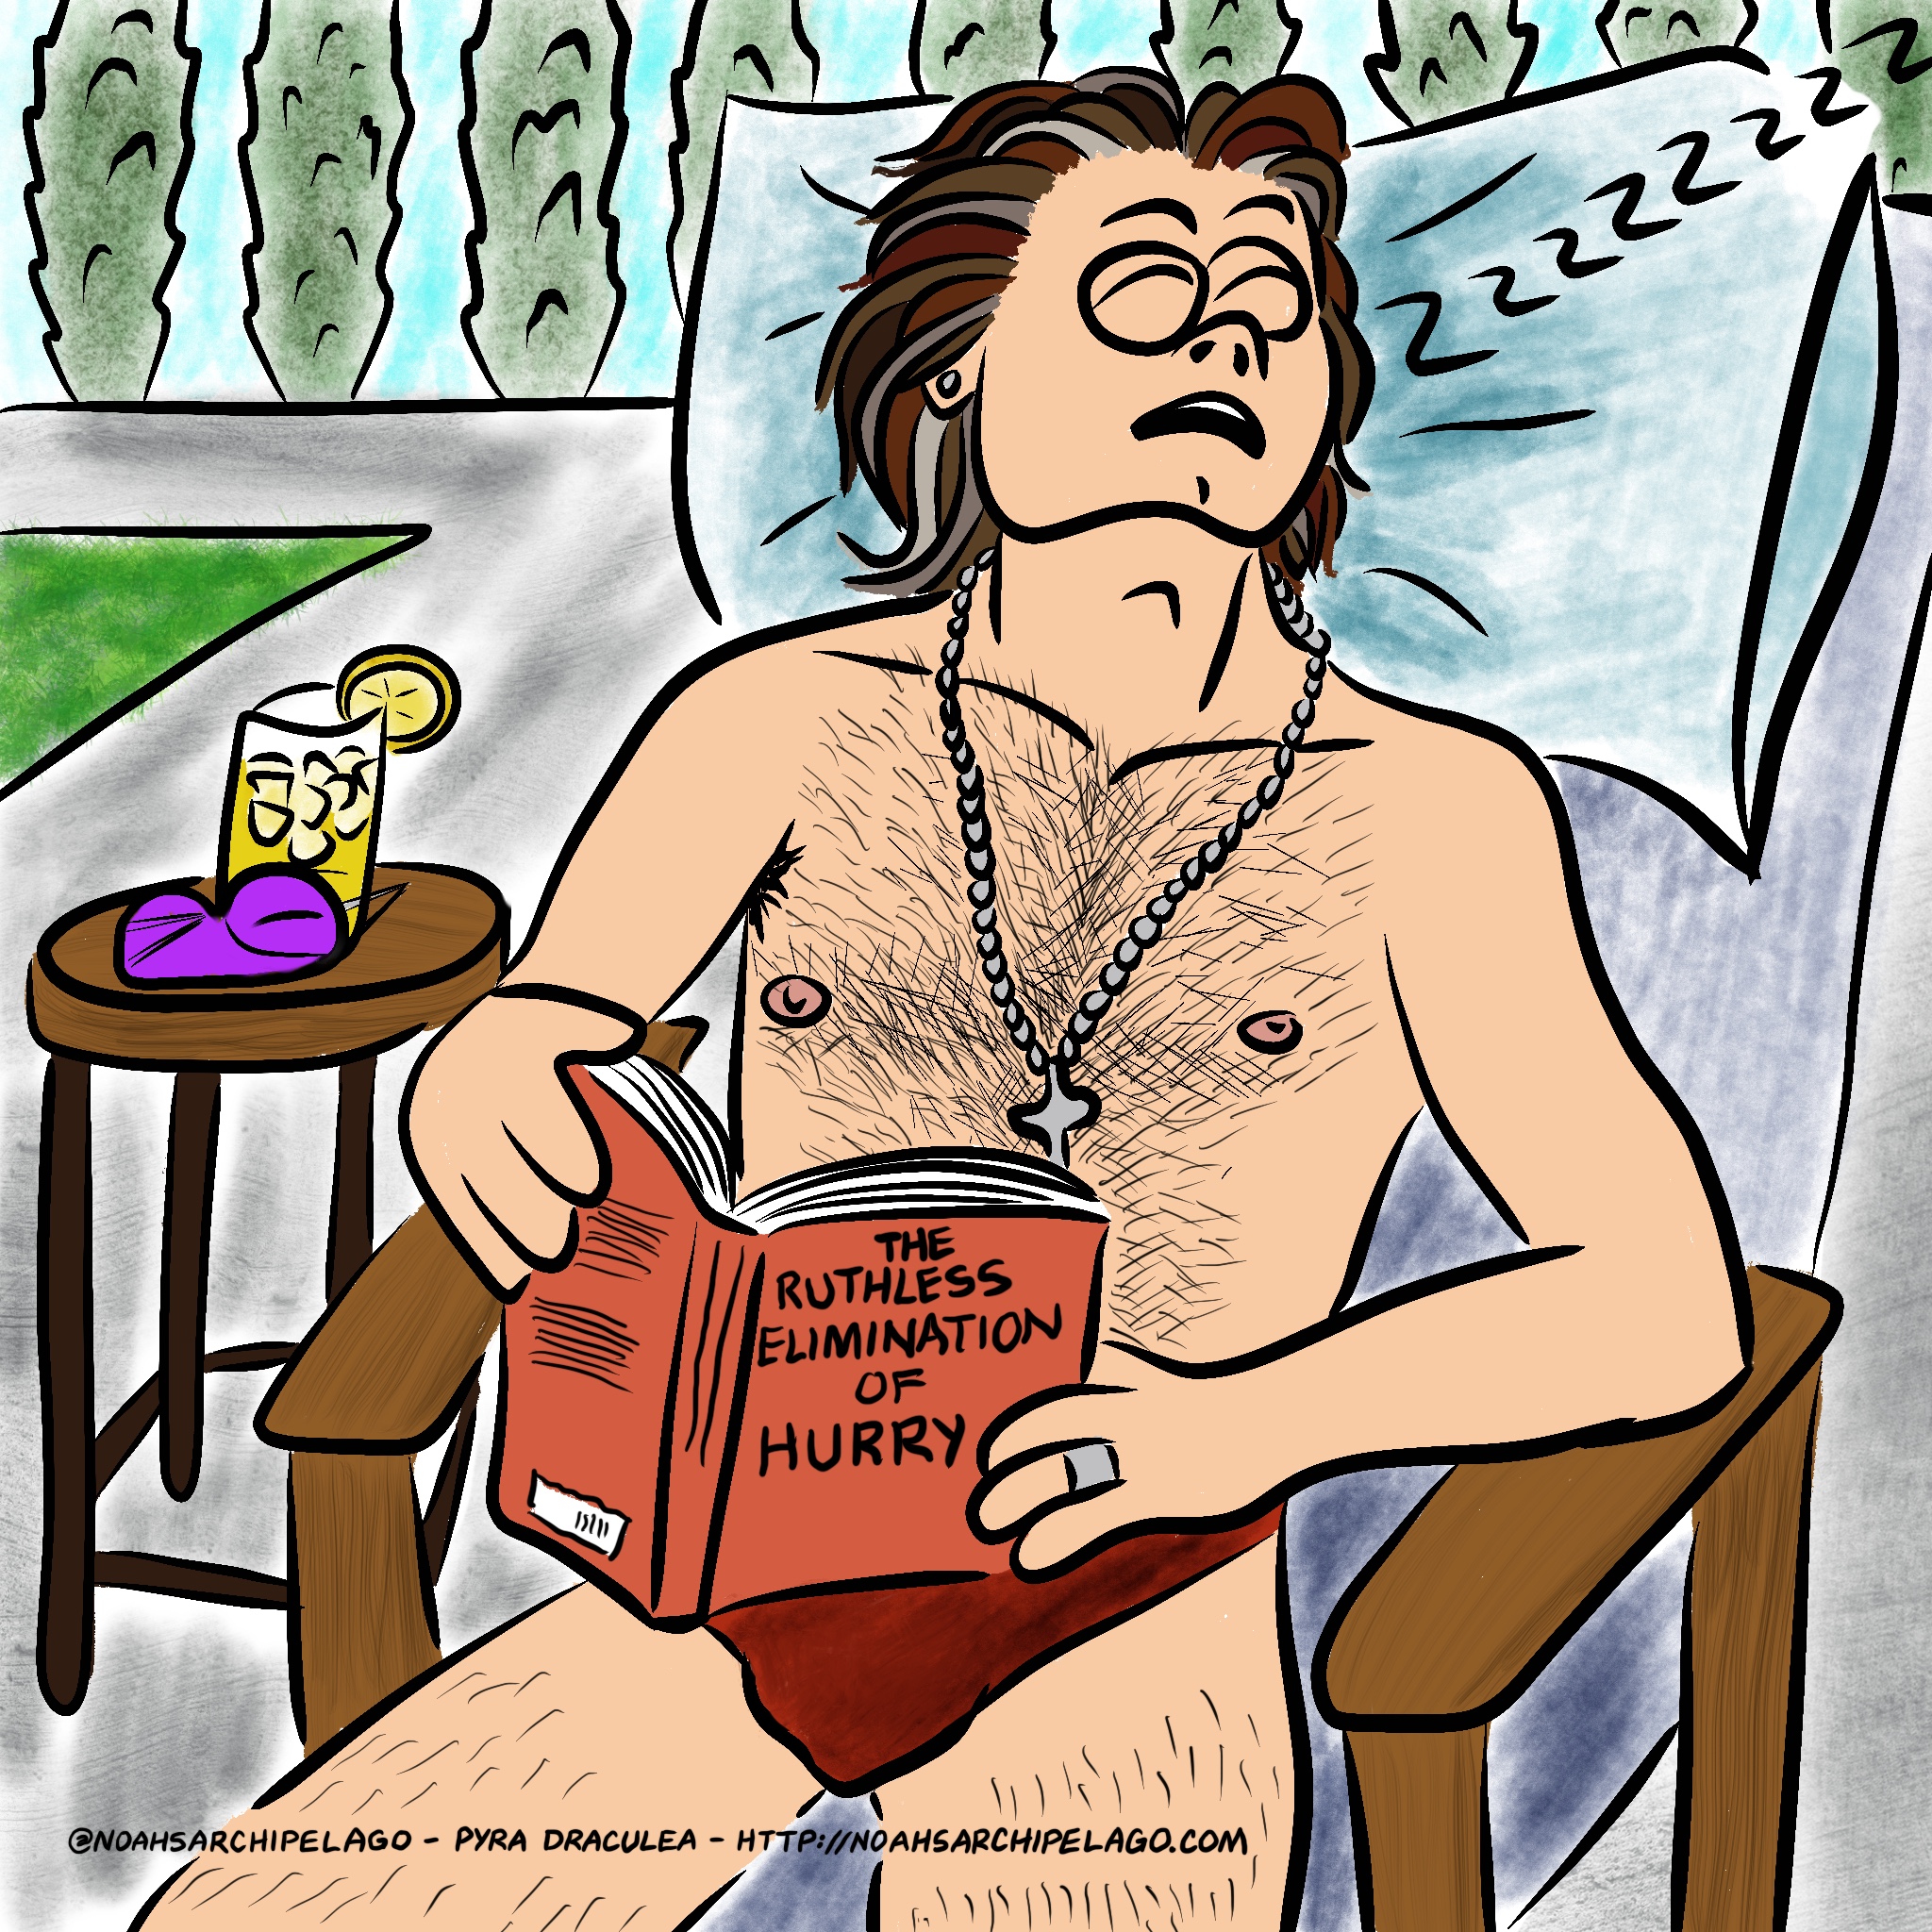 Noah is laying fast asleep on a lounge chair in his in-laws' back yard, wearing a red speedo,with a glass of lemonade and his shades on a table next to him, a pillow behind his head and a book in his hands. The title of the book is "The Ruthless Elimination of Hurry."